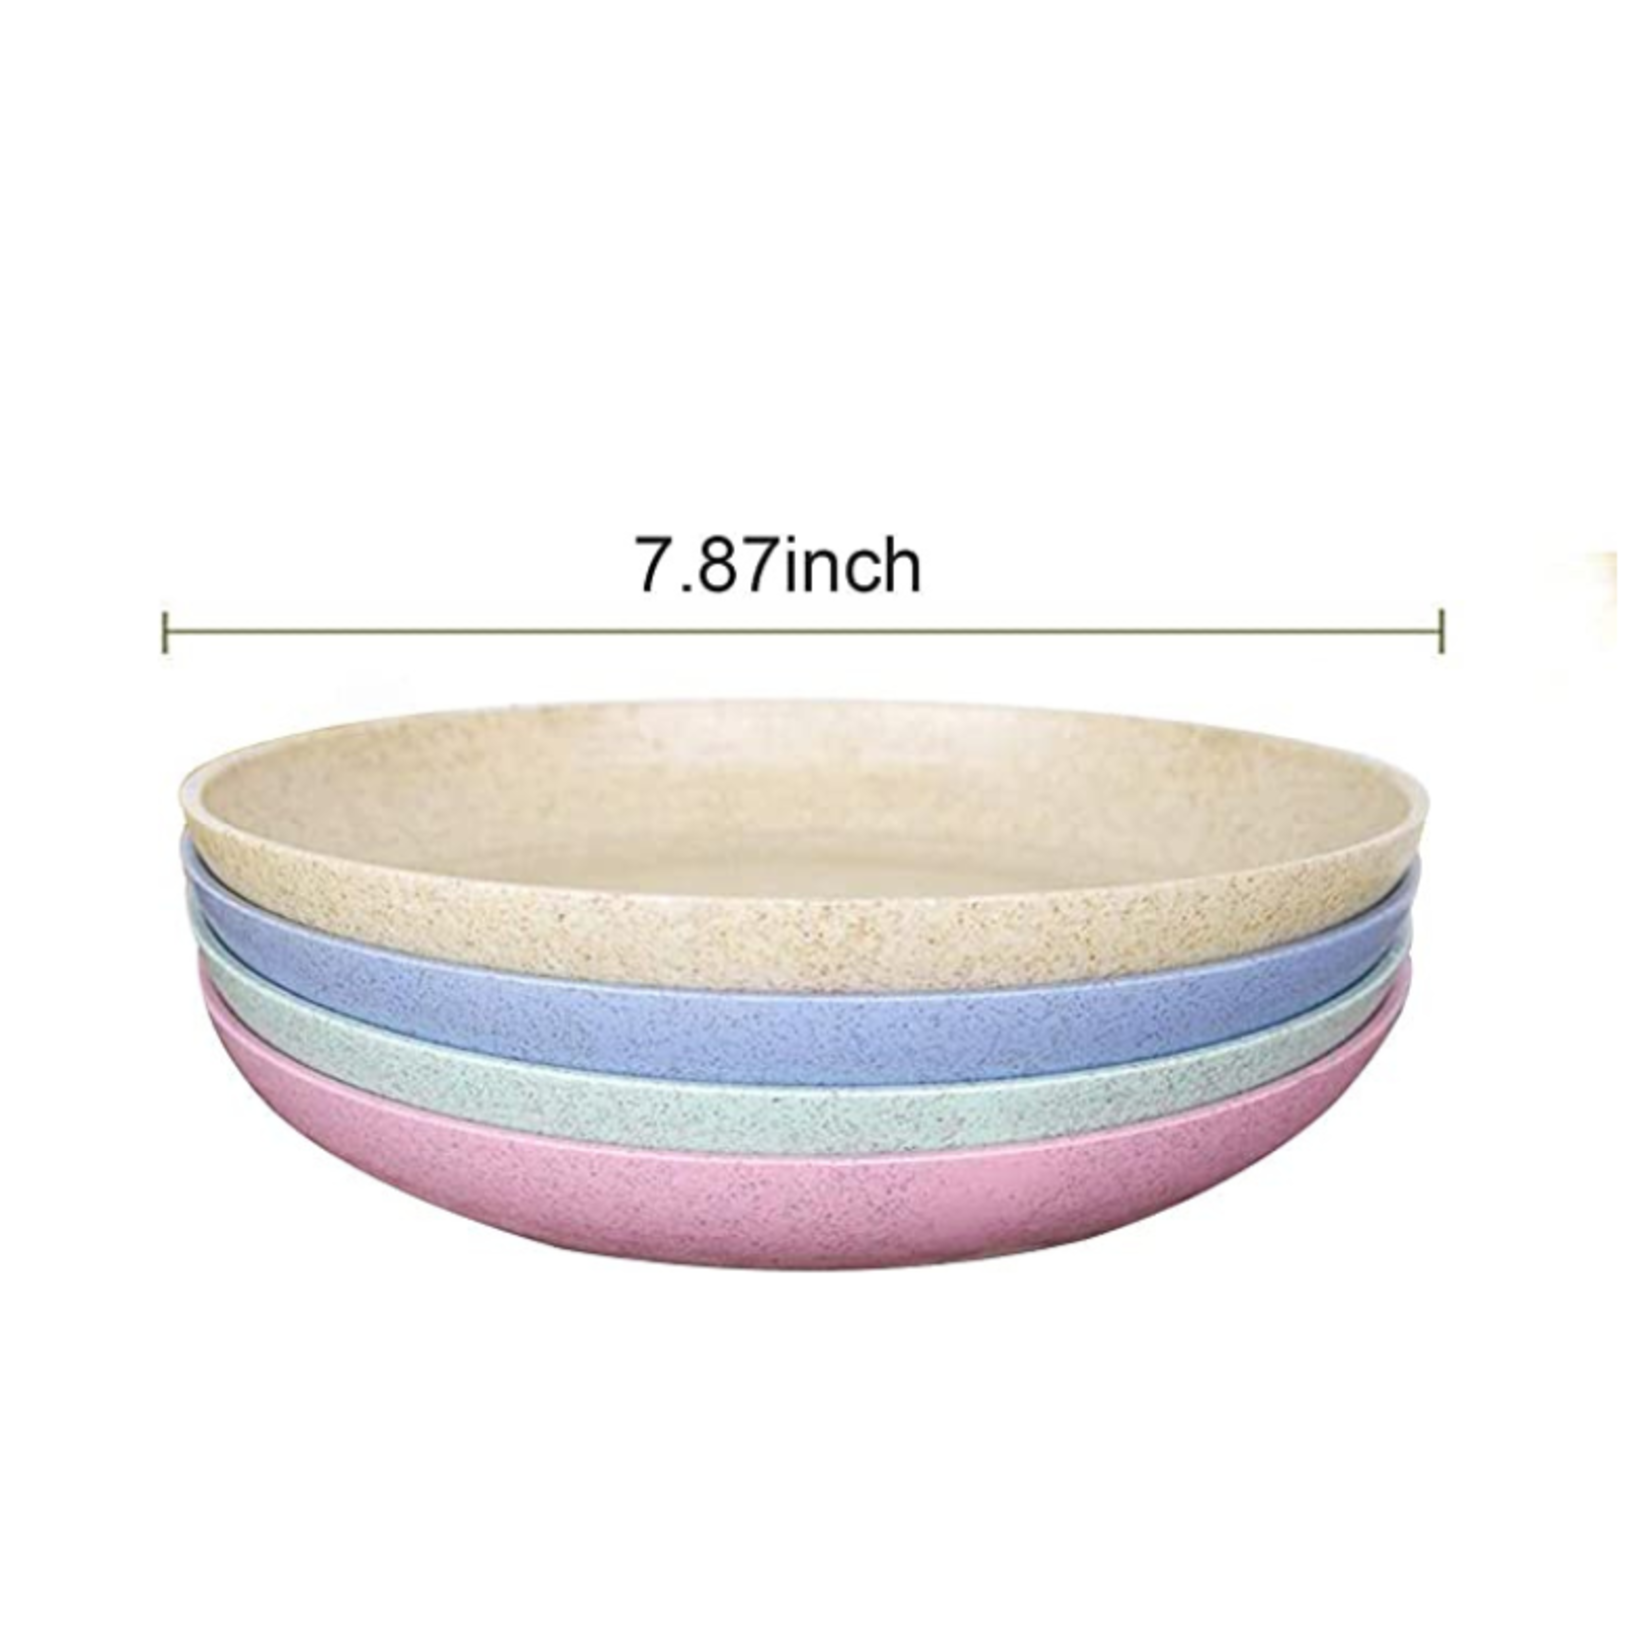 Wheat Straw Plates - 4 Pack